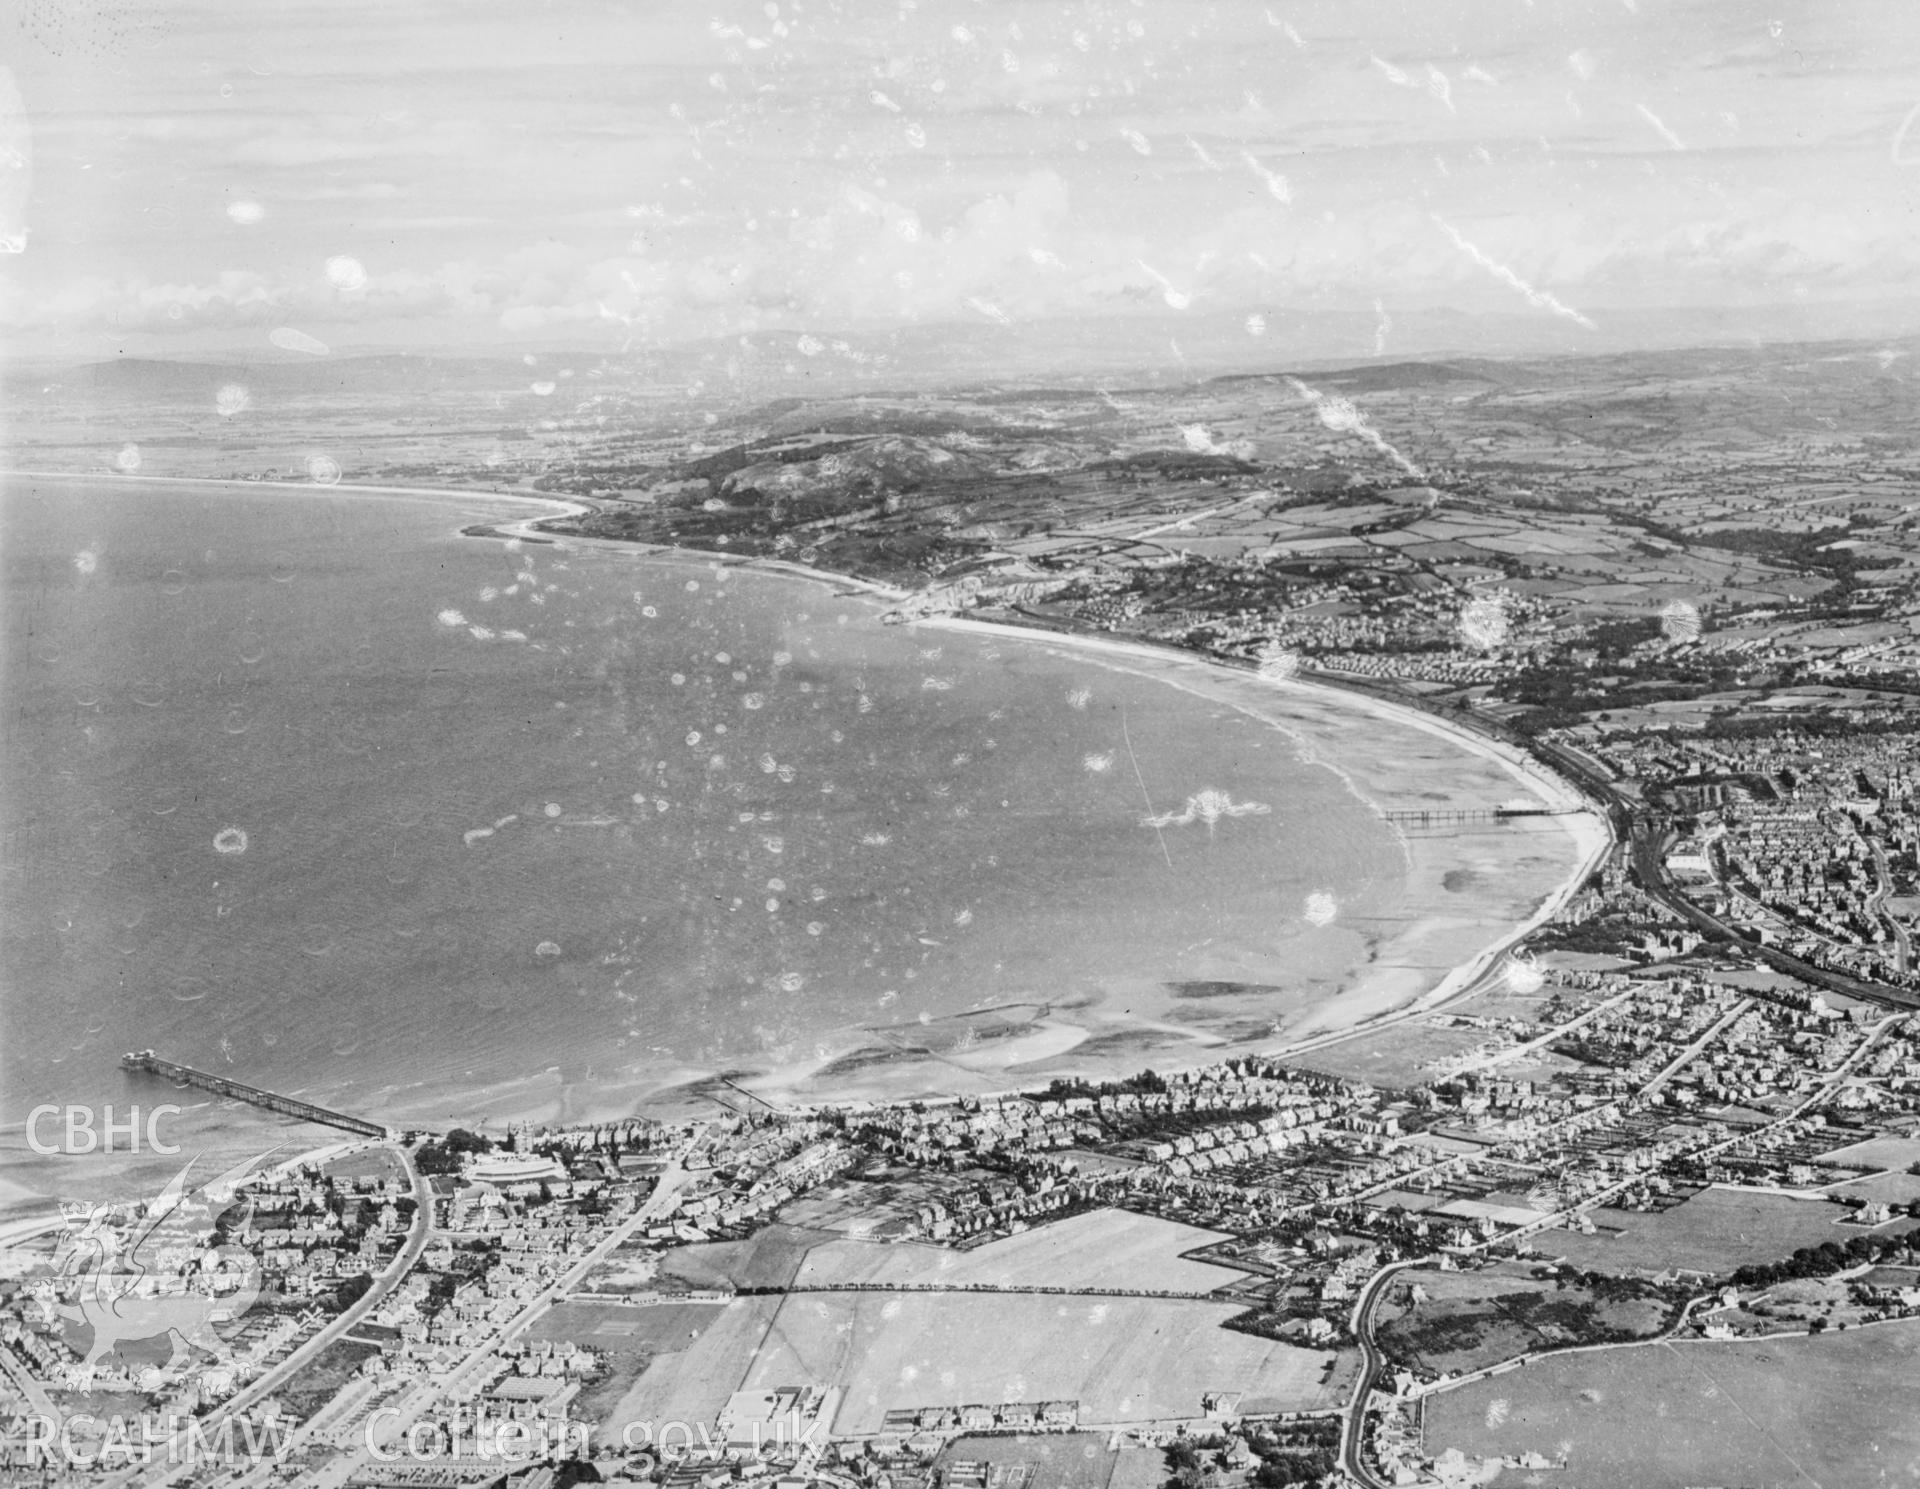 Distant view of Colwyn Bay. Oblique aerial photograph, 5?x4? BW glass plate.